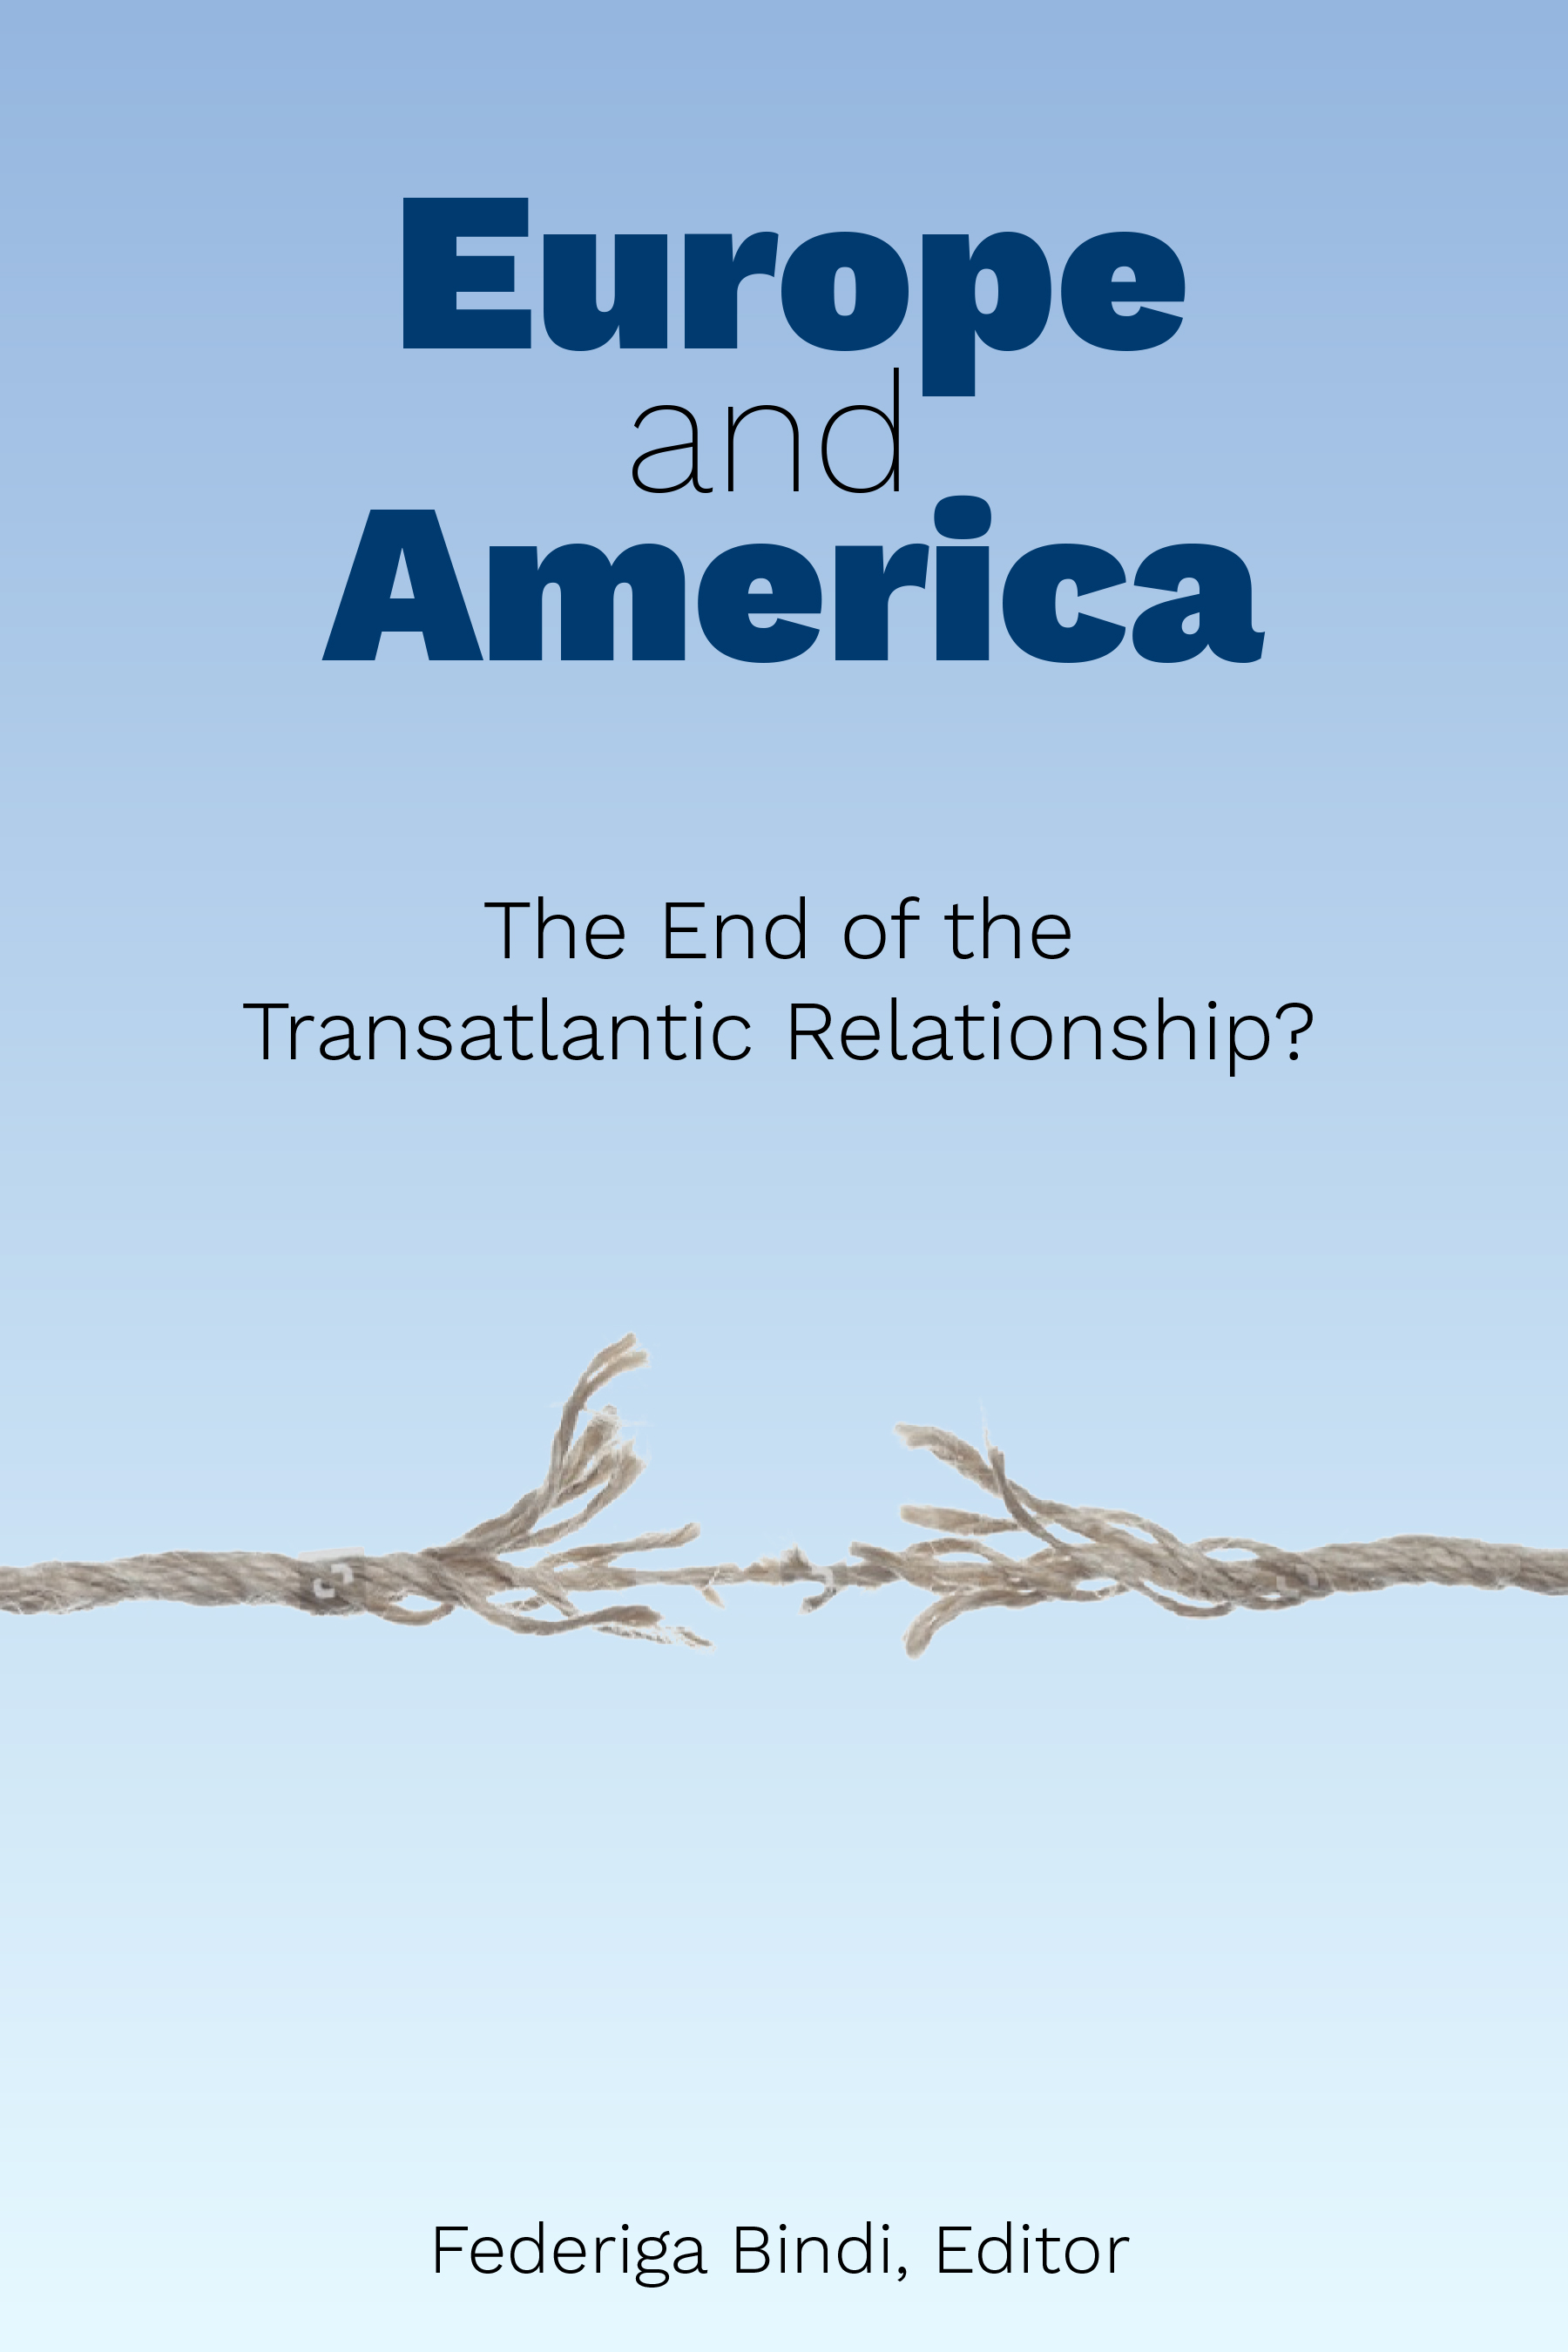 Europe and America: The End of the Transatlantic Relationship?